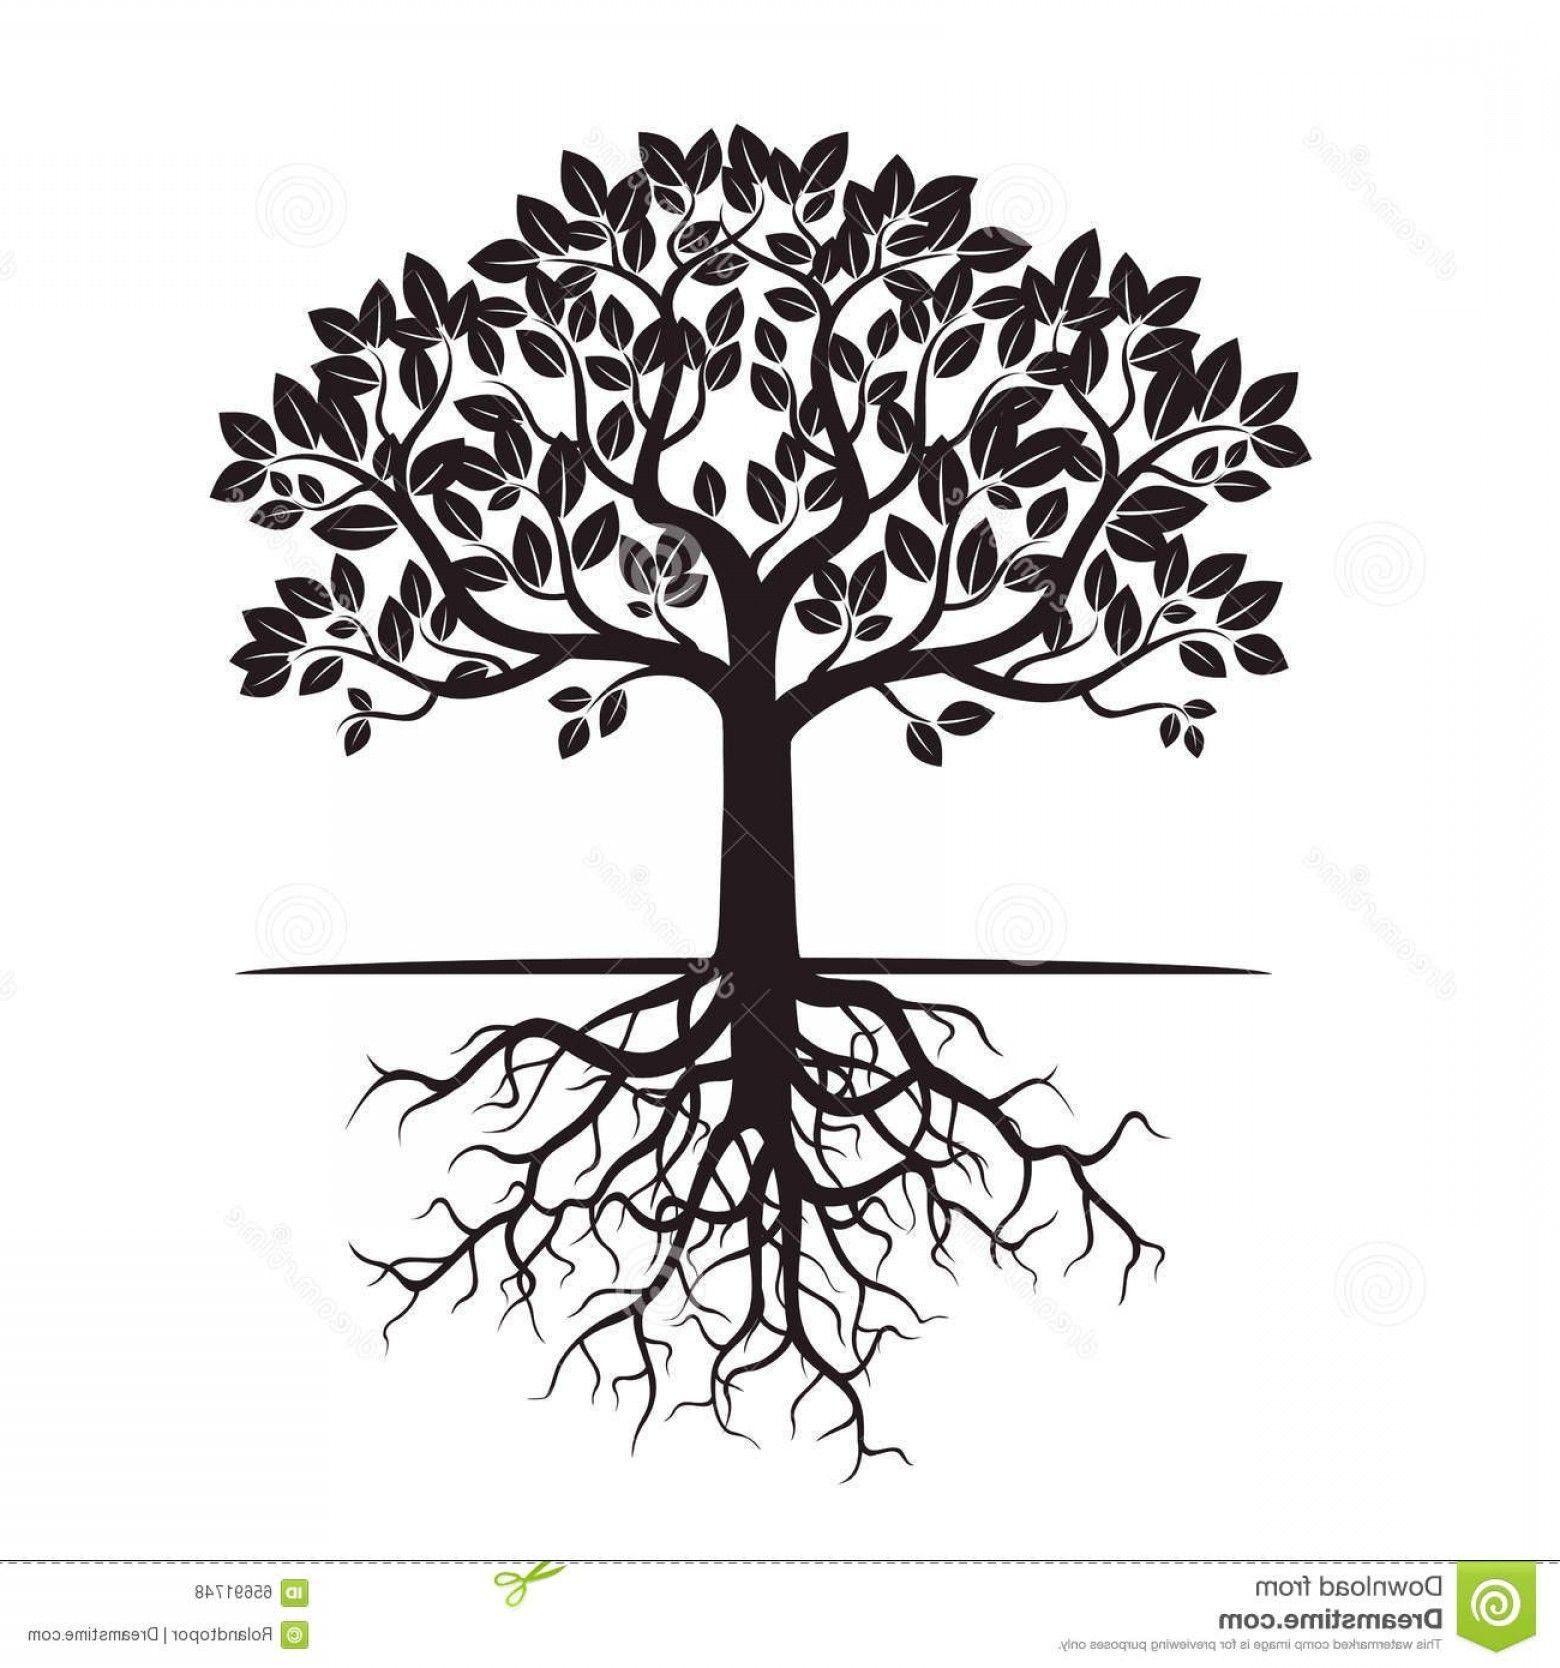 Black Tree with Roots Logo - Stock Illustration Black Tree Roots Vector Illustration Graphic